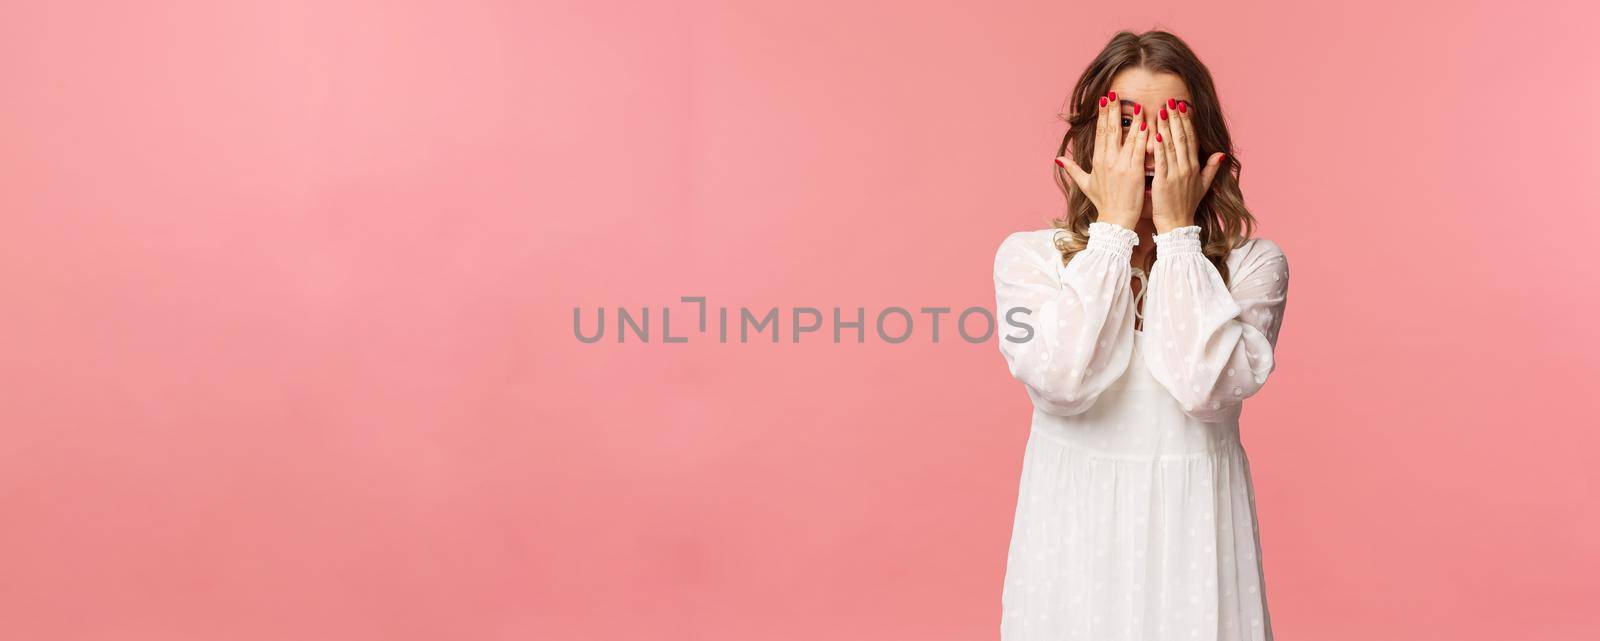 Portrait of silly cute girl with blond short hair, wear white dress, hiding face behind hands, promise to wait for signal but peeking through fingers, cant resist temptation, stand pink background.